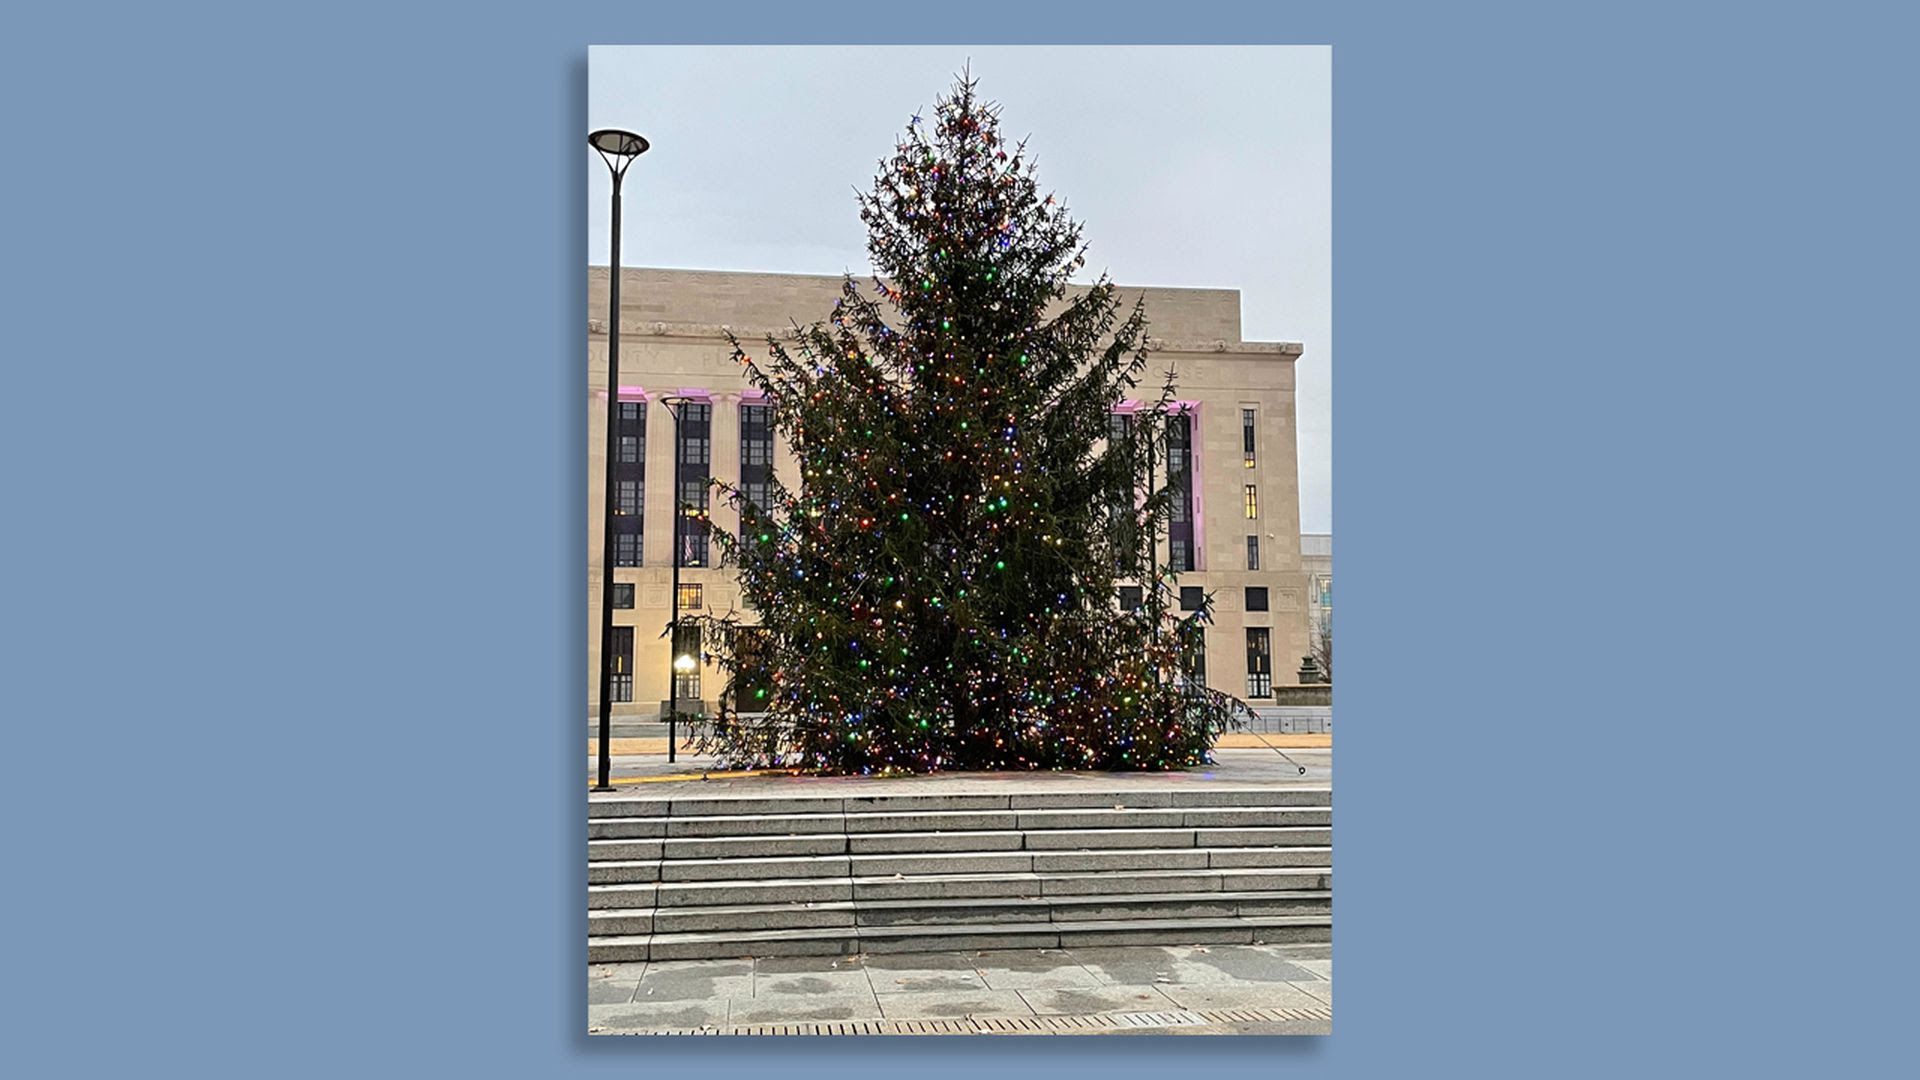 Nashville's Christmas tree, a 35-foot Norway Spruce, outside of the courthouse 